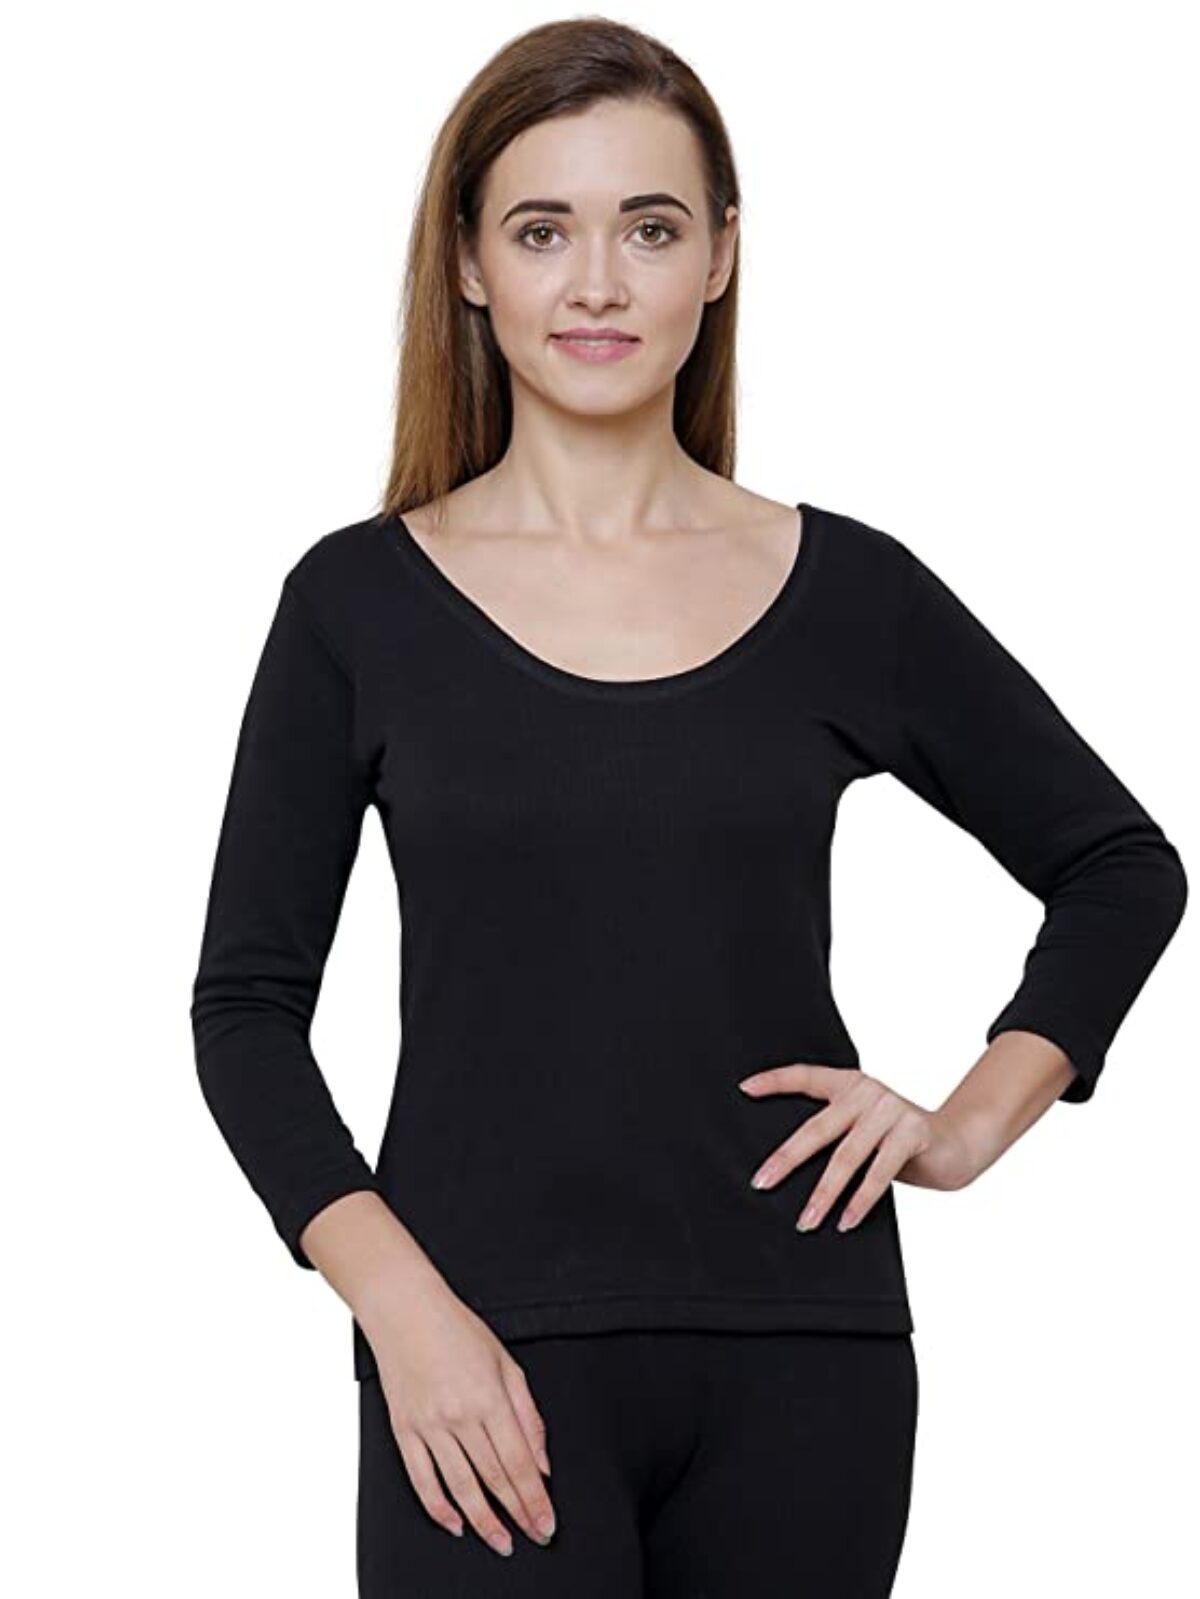 https://inwear.in/wp-content/uploads/2022/10/Bodycare-thermal-top-1200x1599.jpg